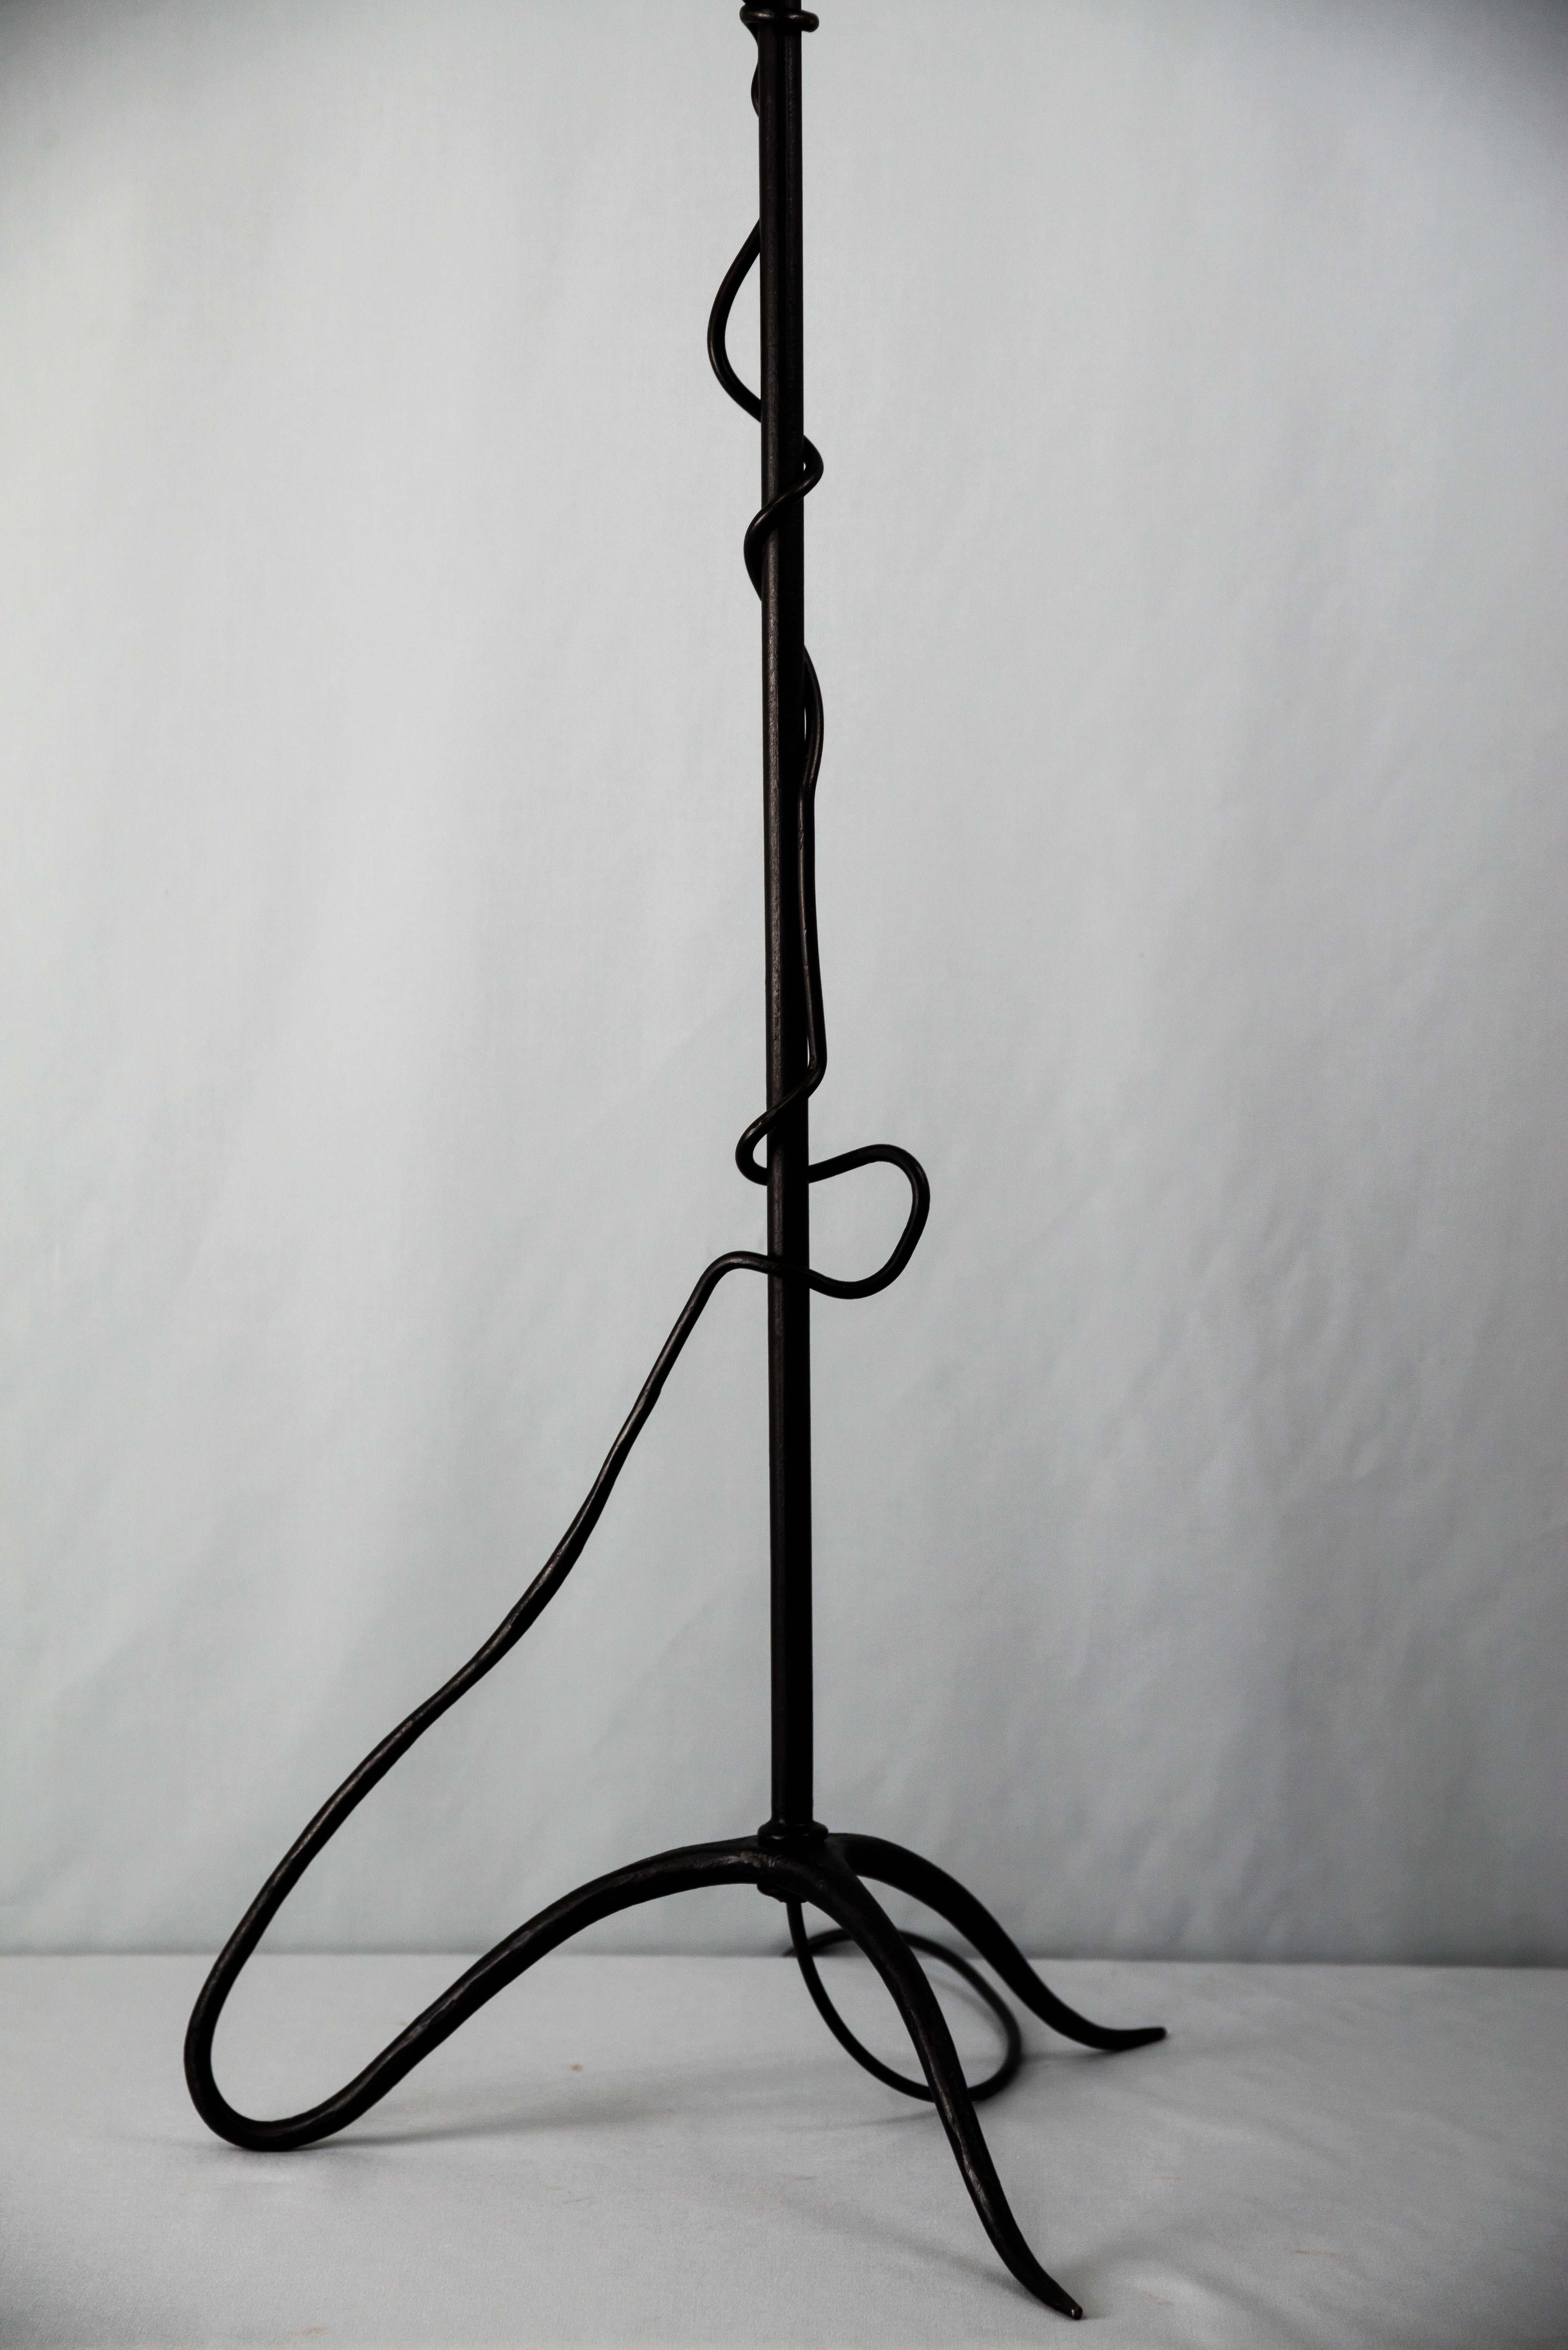 Floor lamp Vienna, circa 1920s
Painted wrought iron
The fabric shade is replaced ( new ) everything else is original condition.